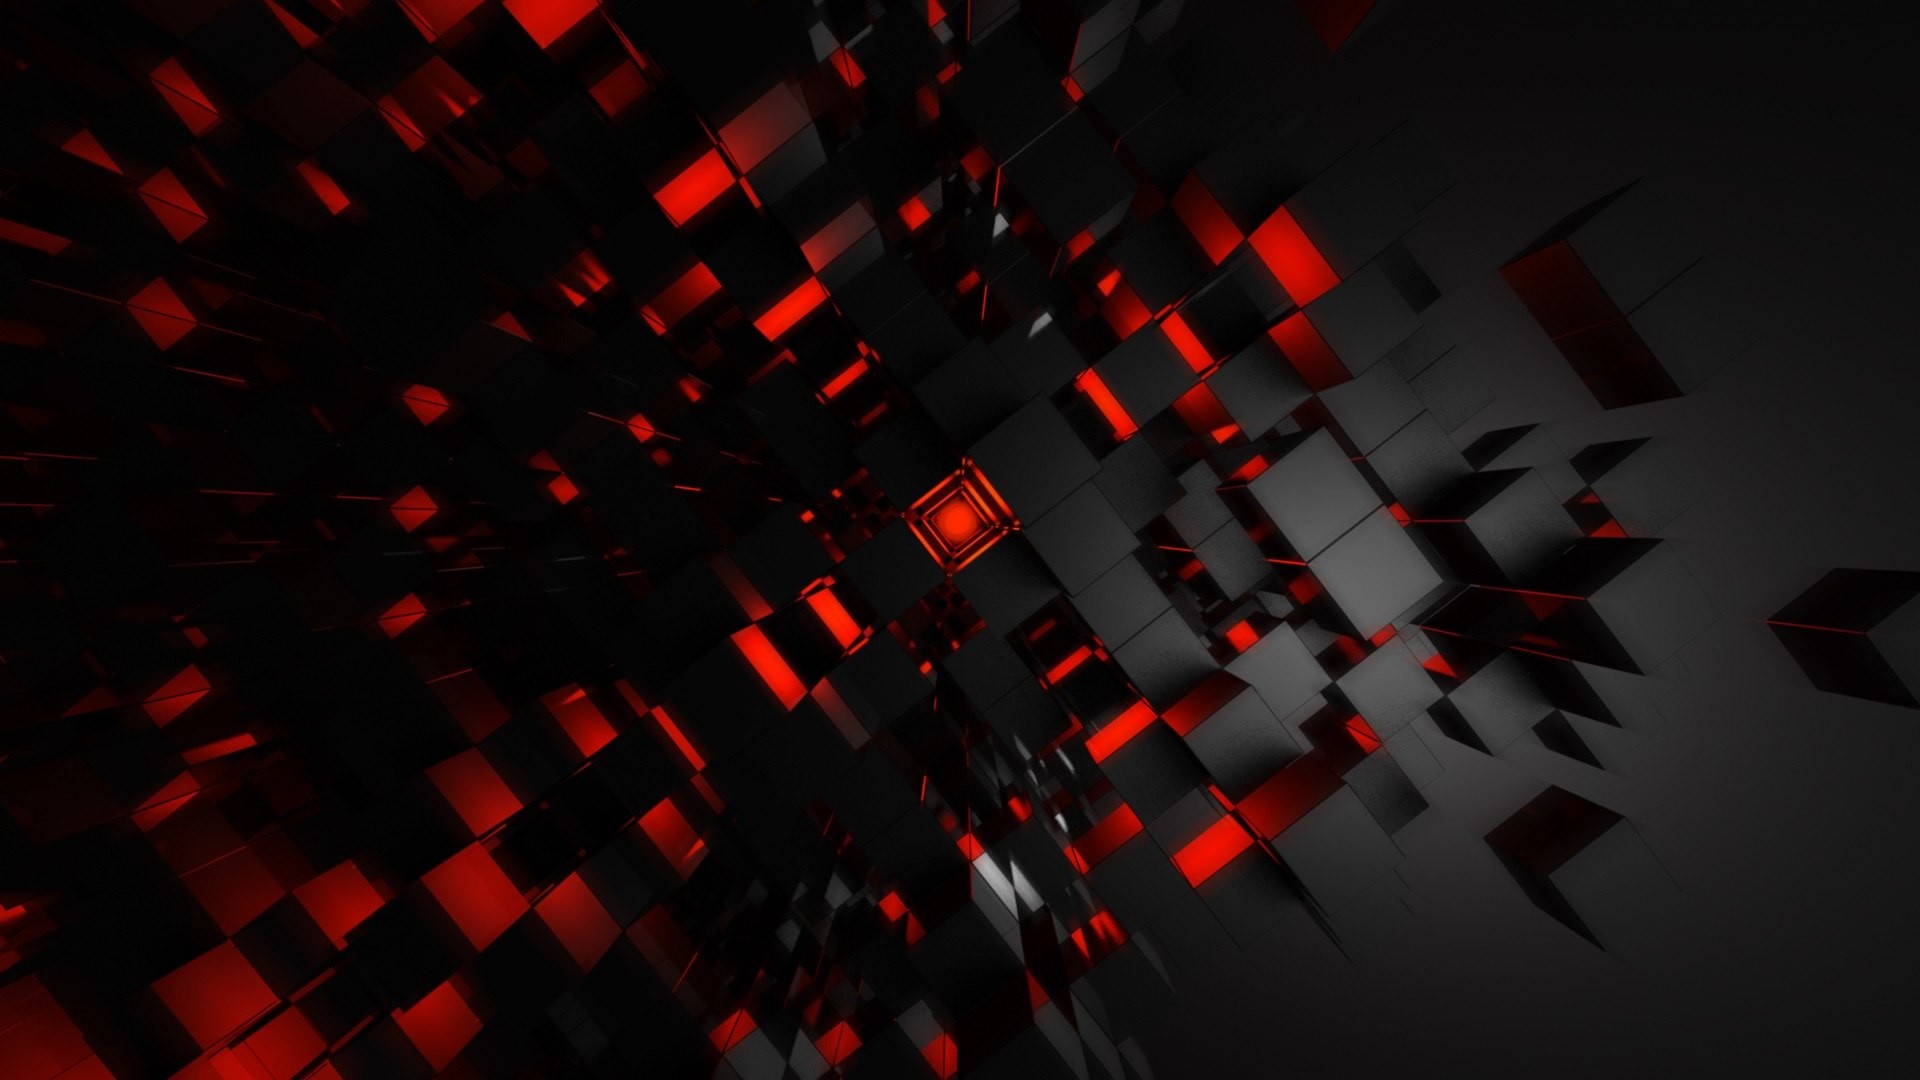 1920x1080 download hd wallpaper of black and red cubes